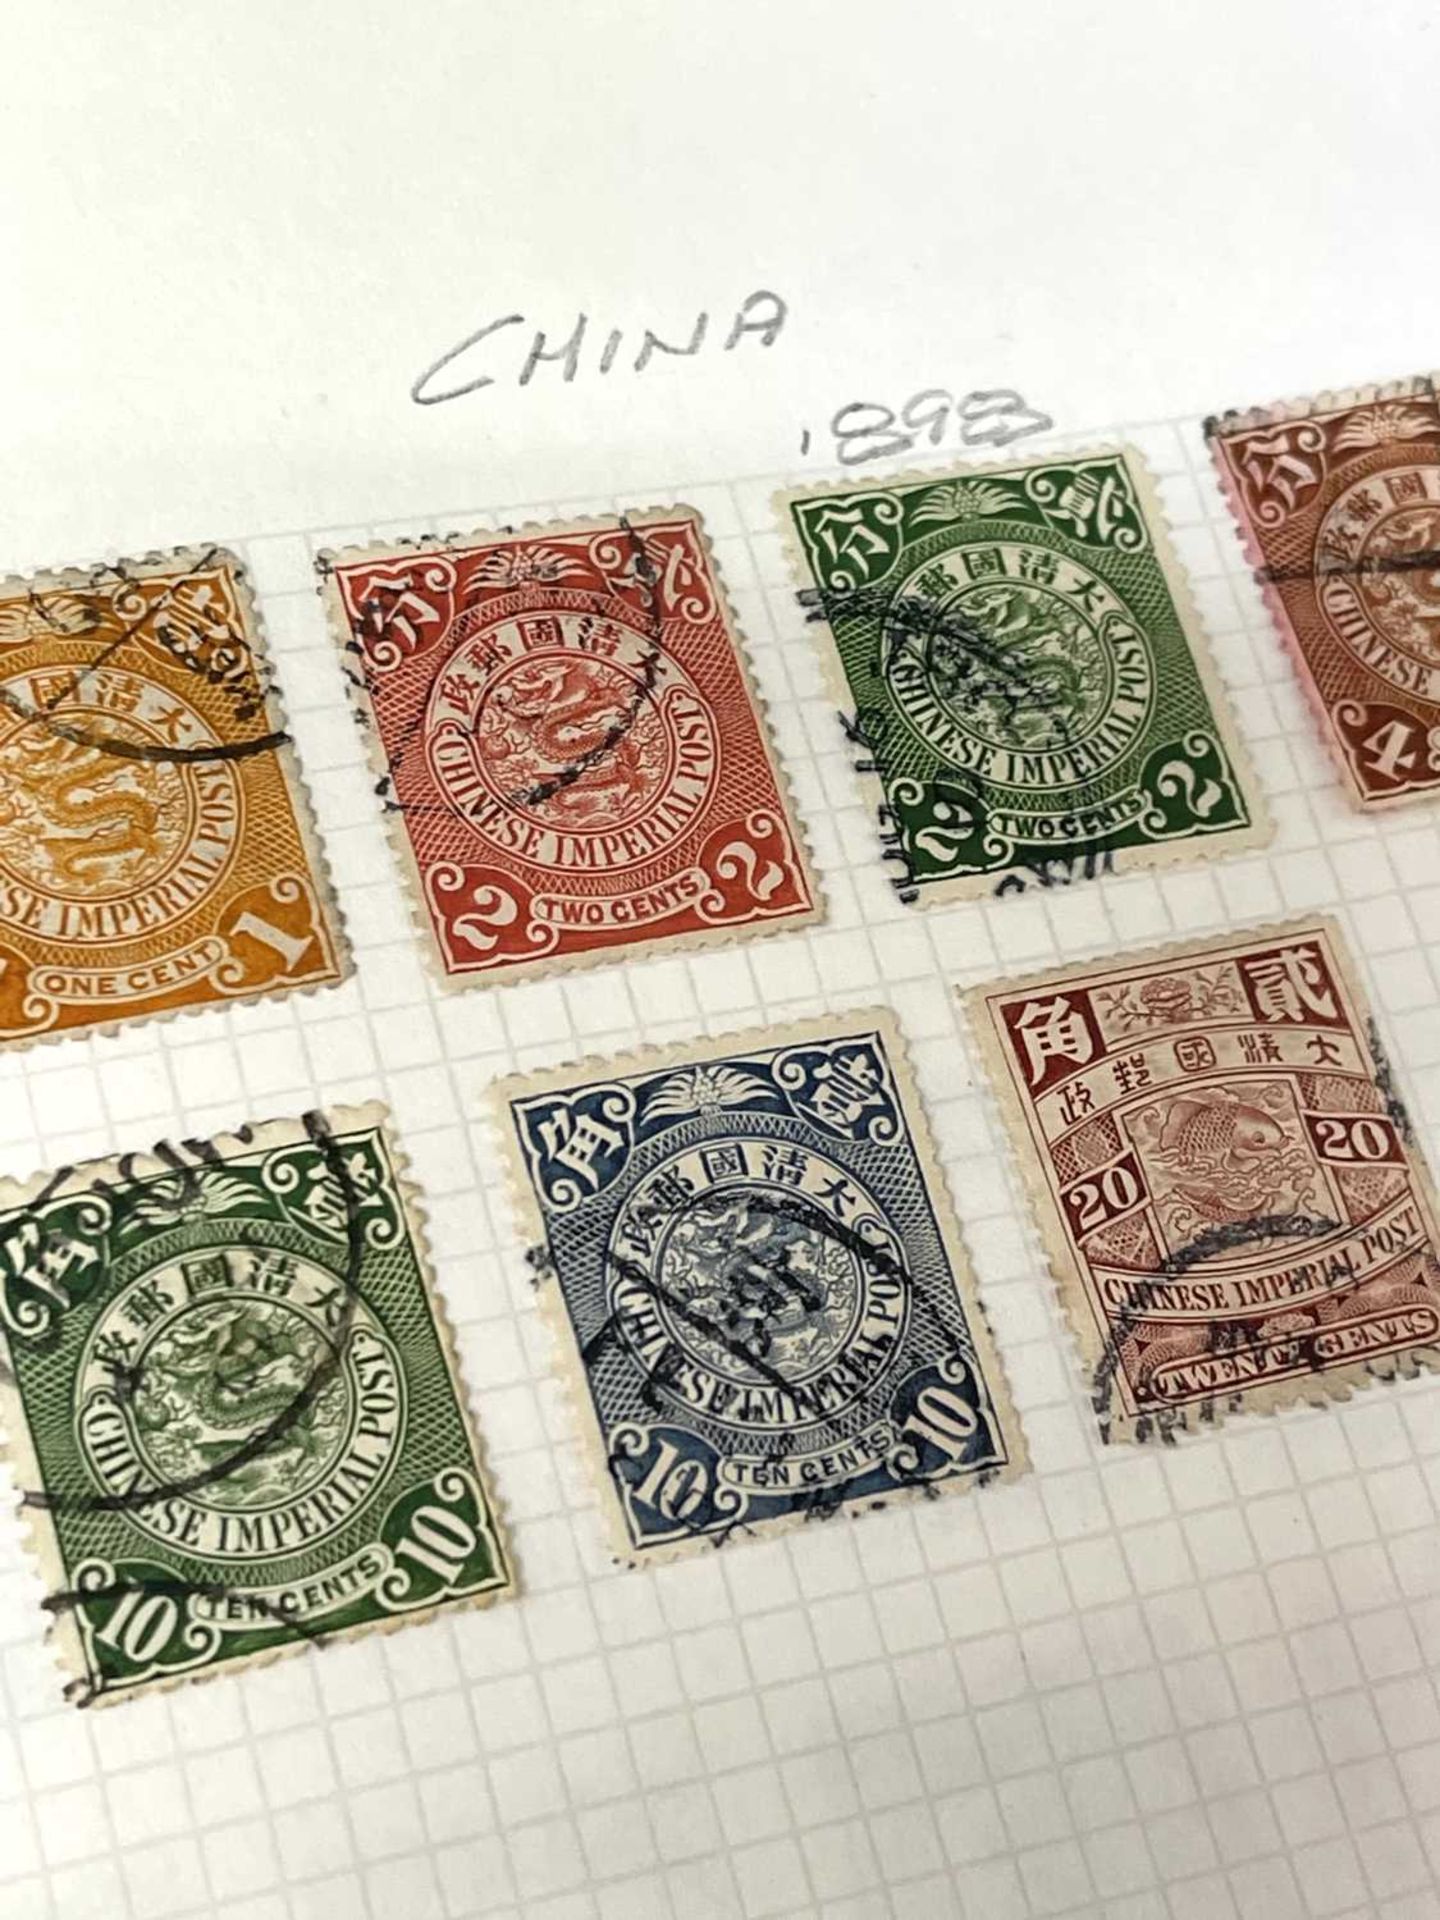 China / Taiwan / Hong Kong Stamp Collection plus rare 1920-1922 International Famine Relief 1 Cent - Image 3 of 7